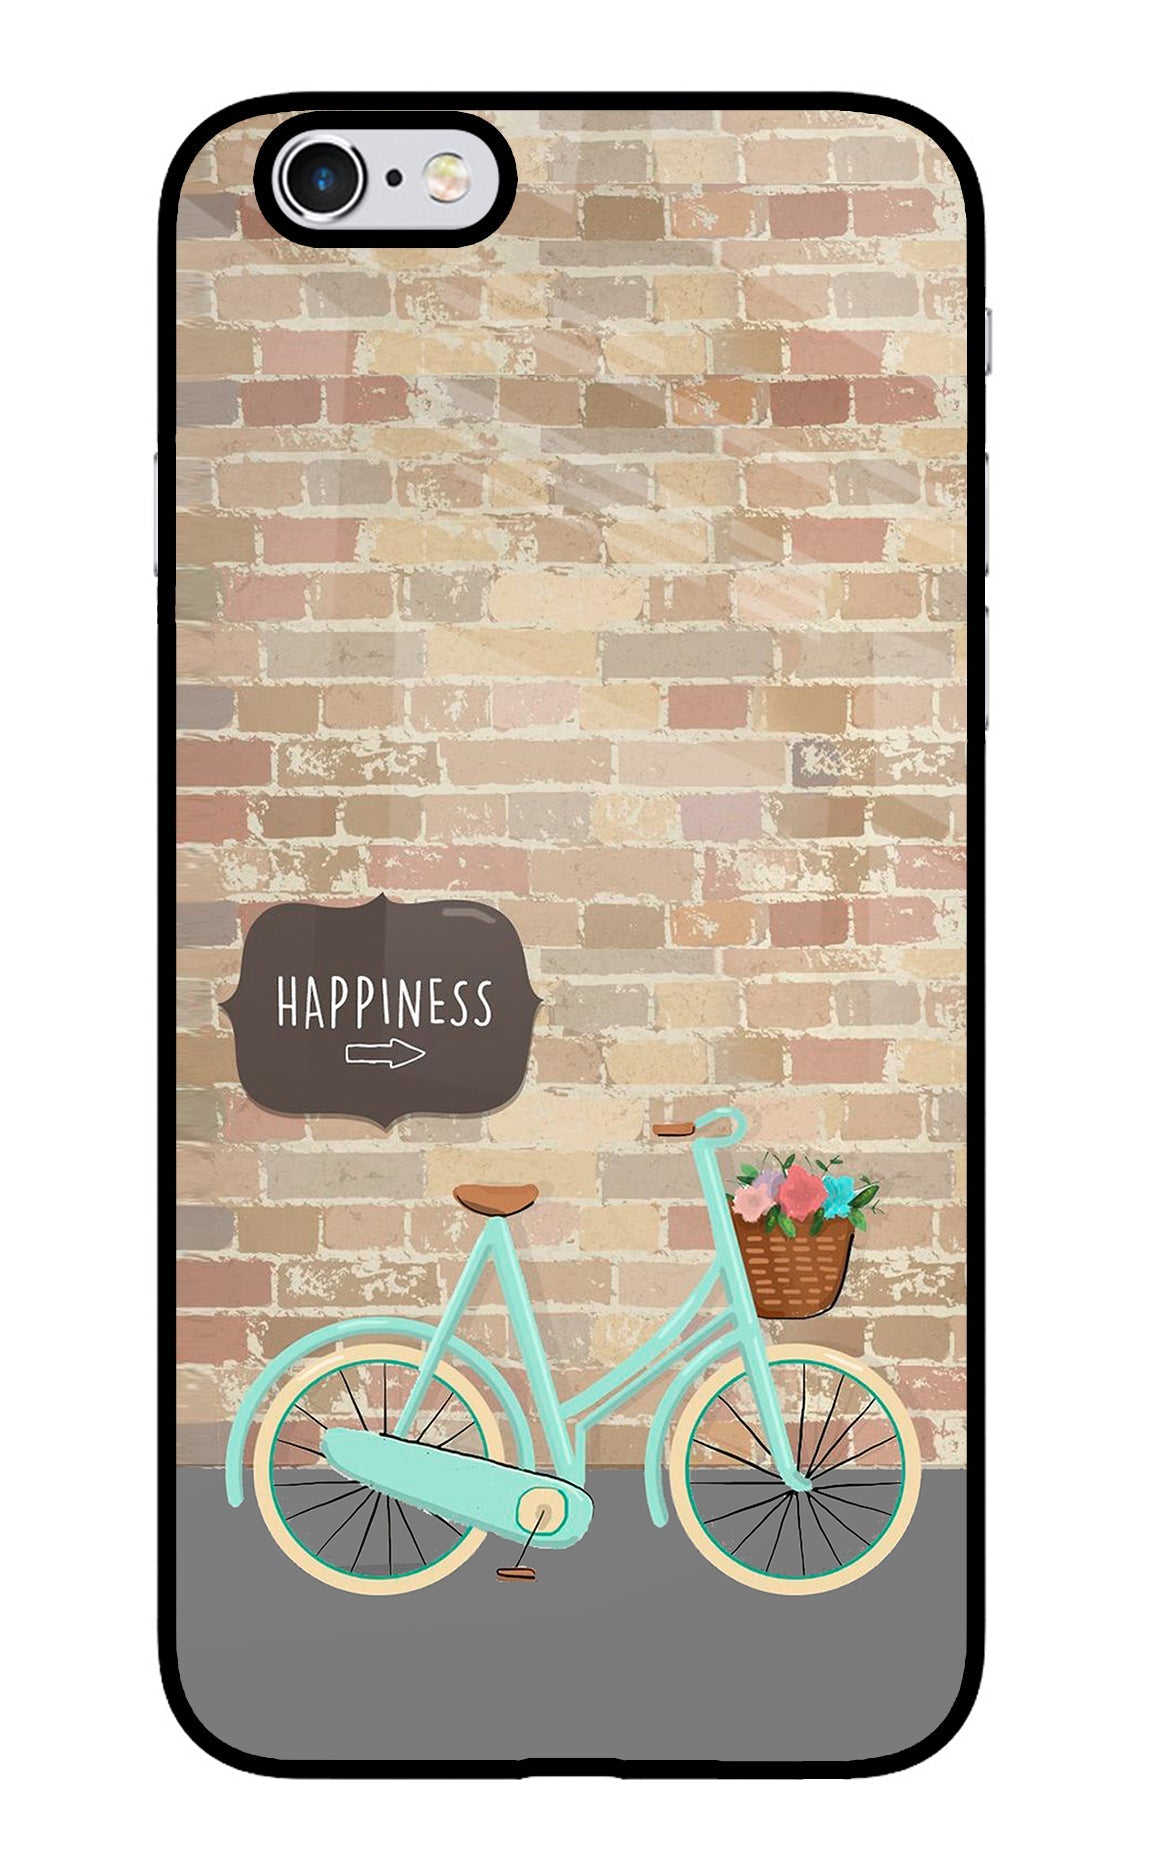 Happiness Artwork iPhone 6/6s Glass Case